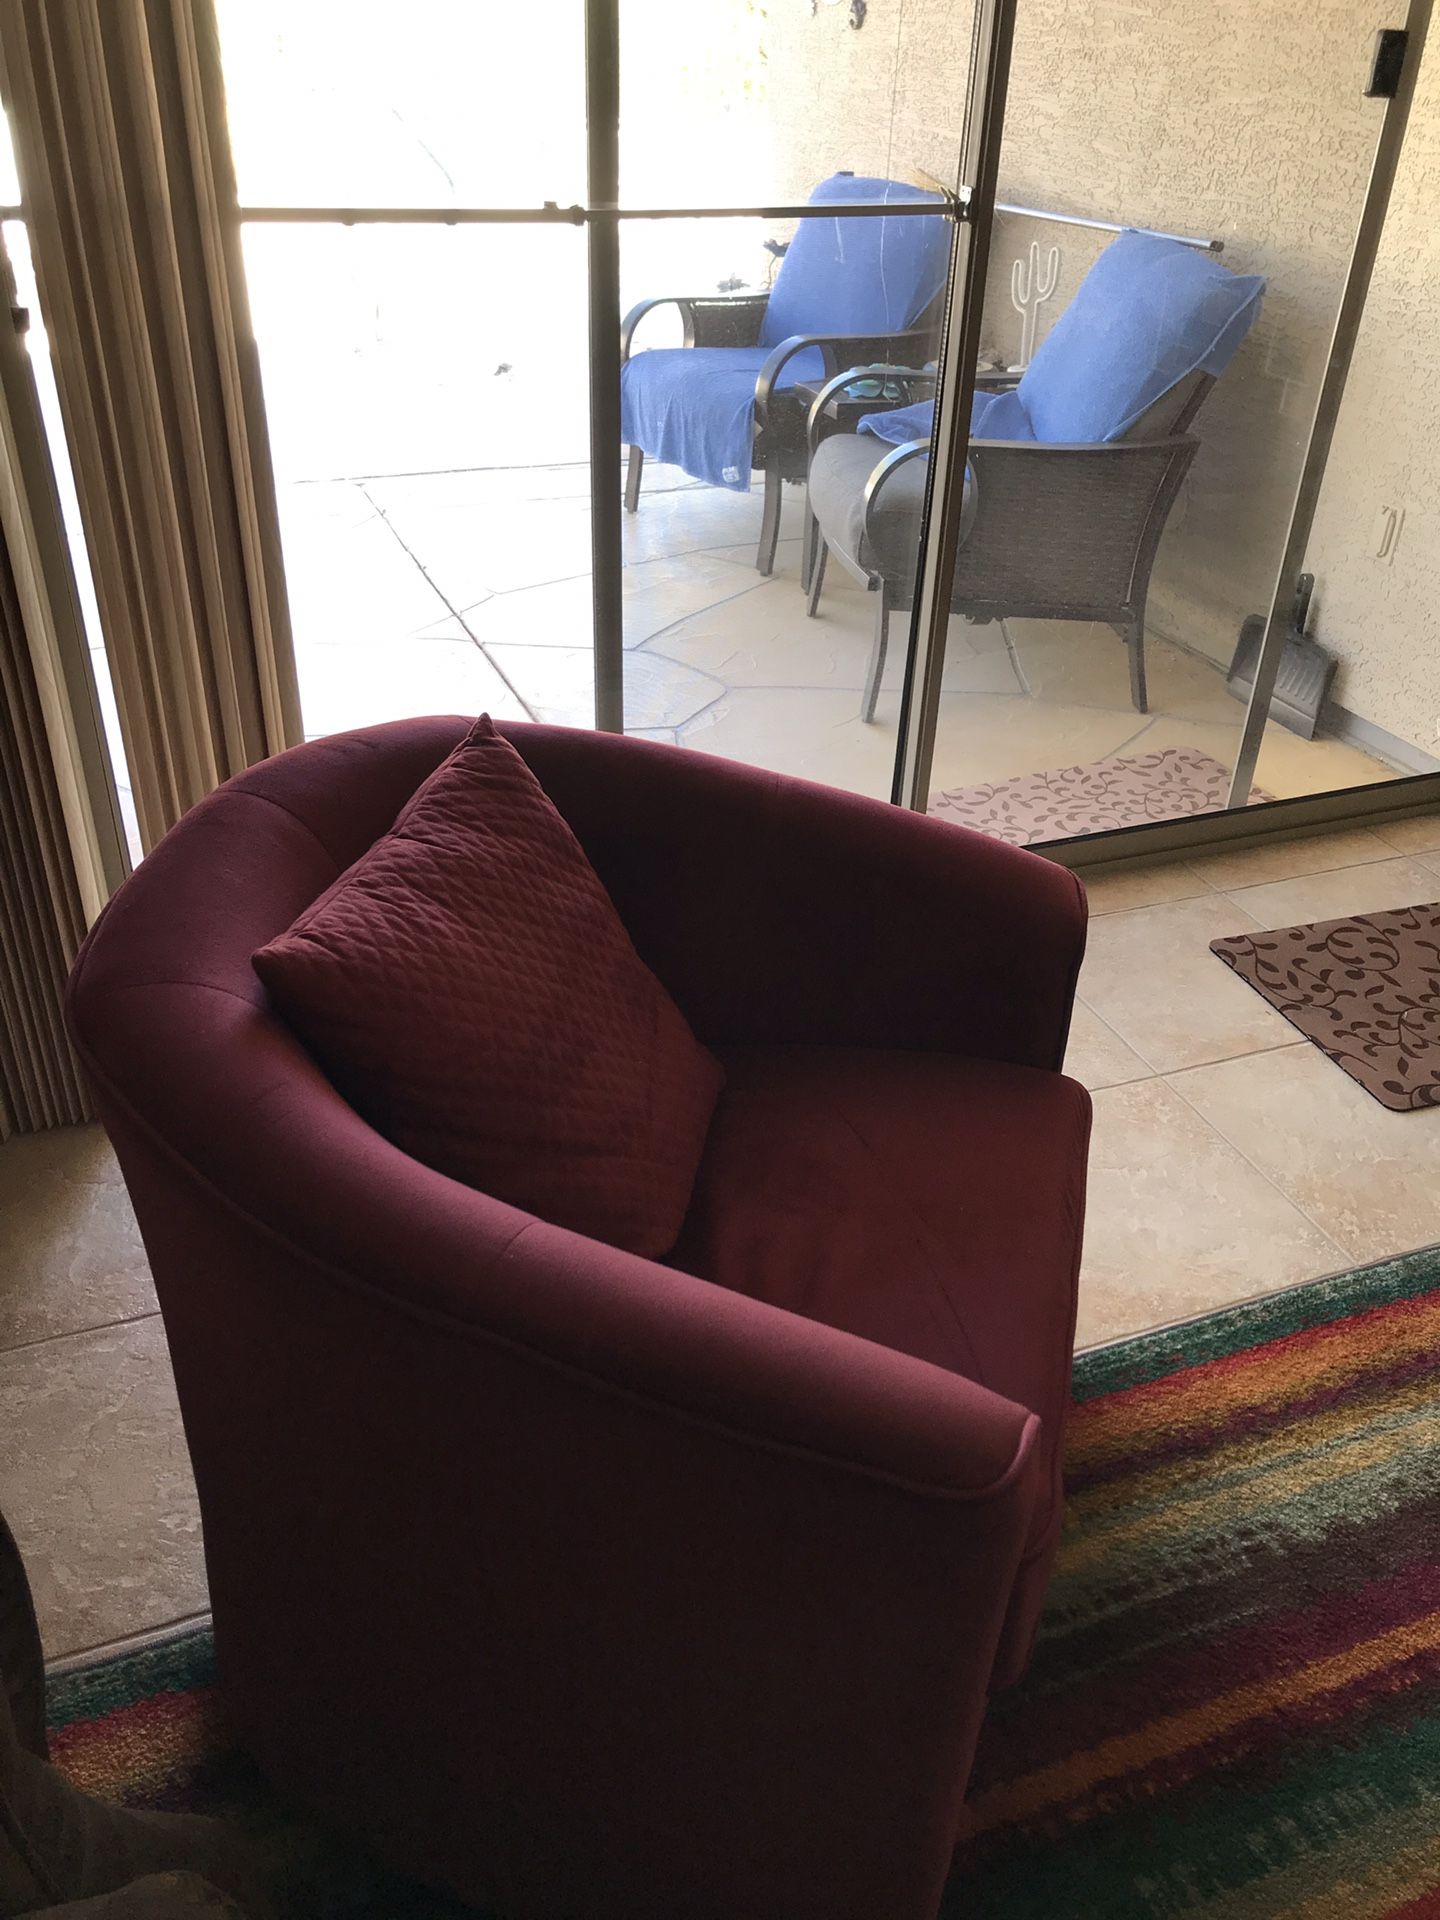 Couch (reclining) and a swivel chair